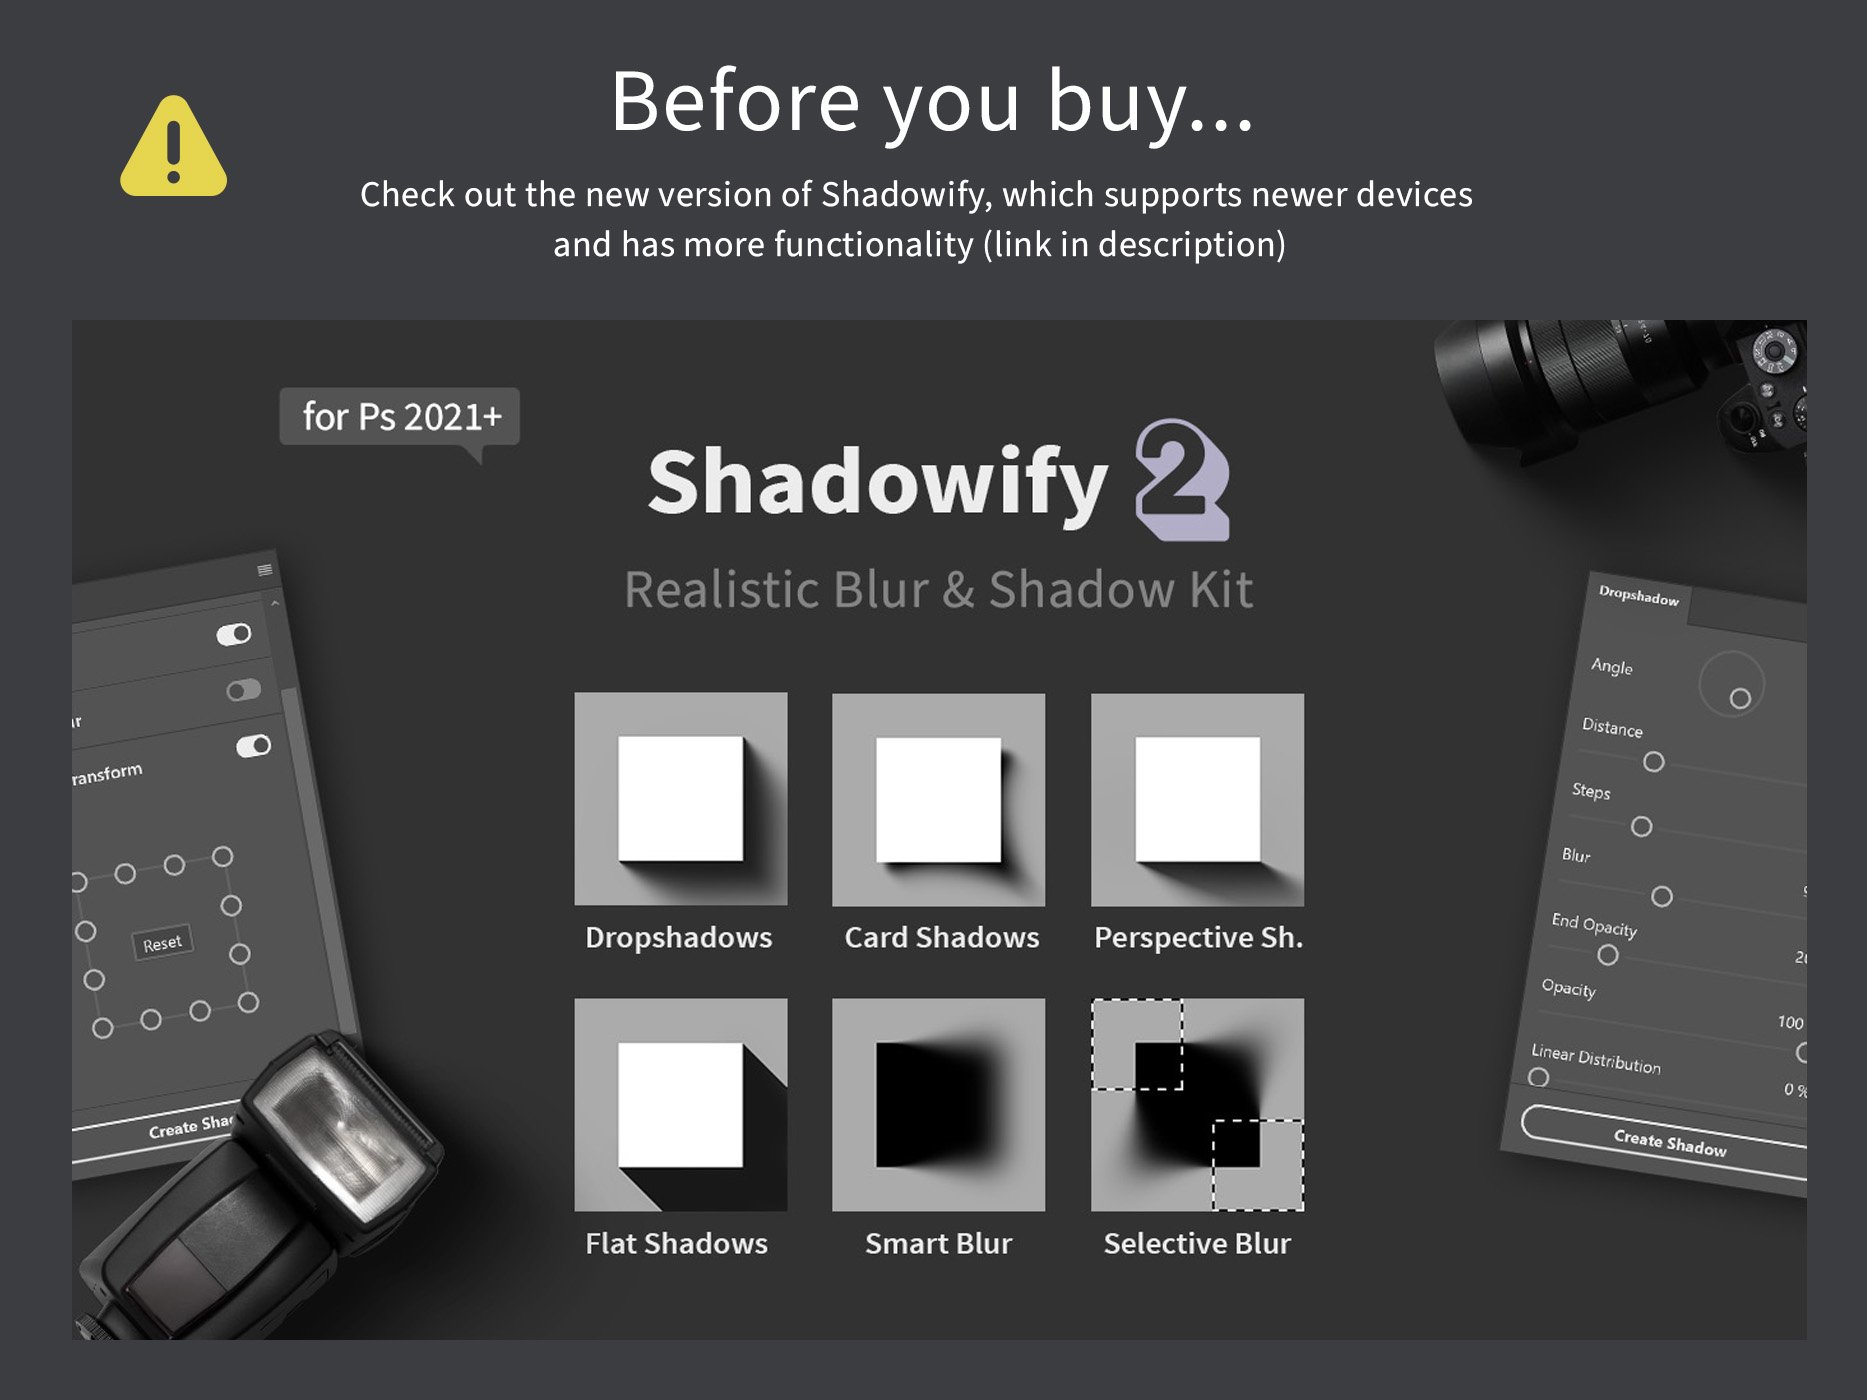 Shadowify - Blur & Shadow Kitpreview image.